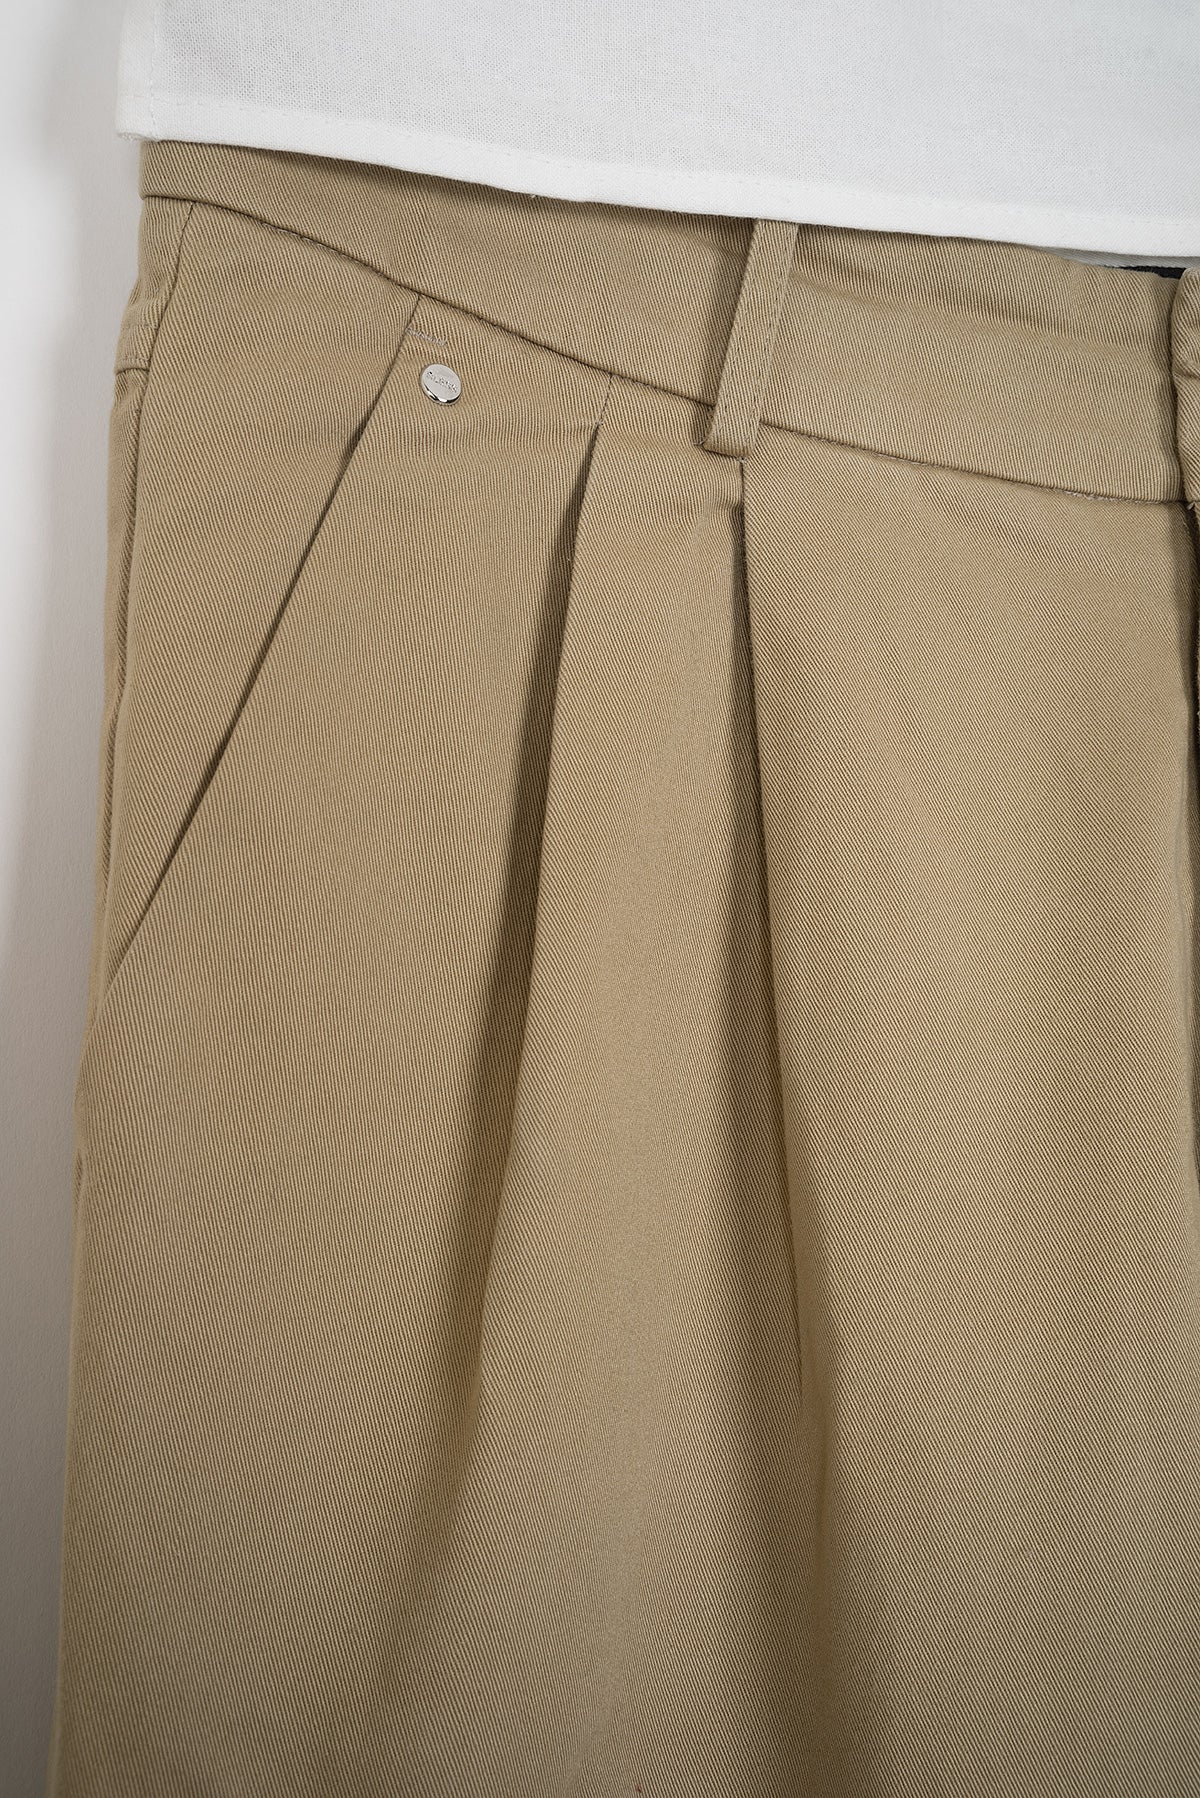 2011 S/S N° 42 CLASSIC PLEATED-BROTHER TROUSERS